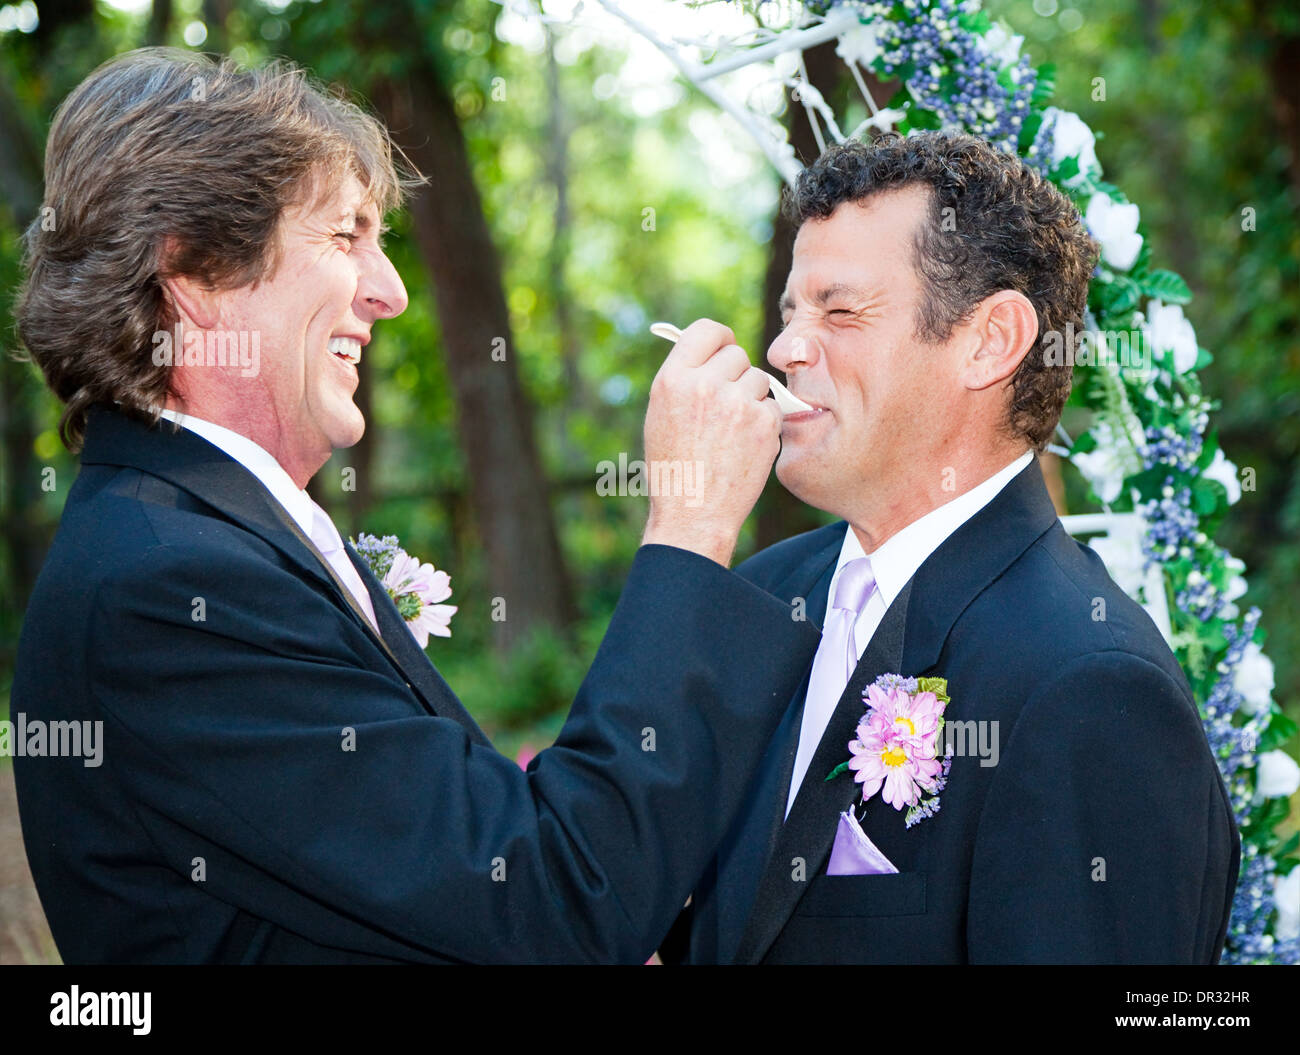 One groom at a gay wedding feeding cake to his husband and laughing.  Stock Photo